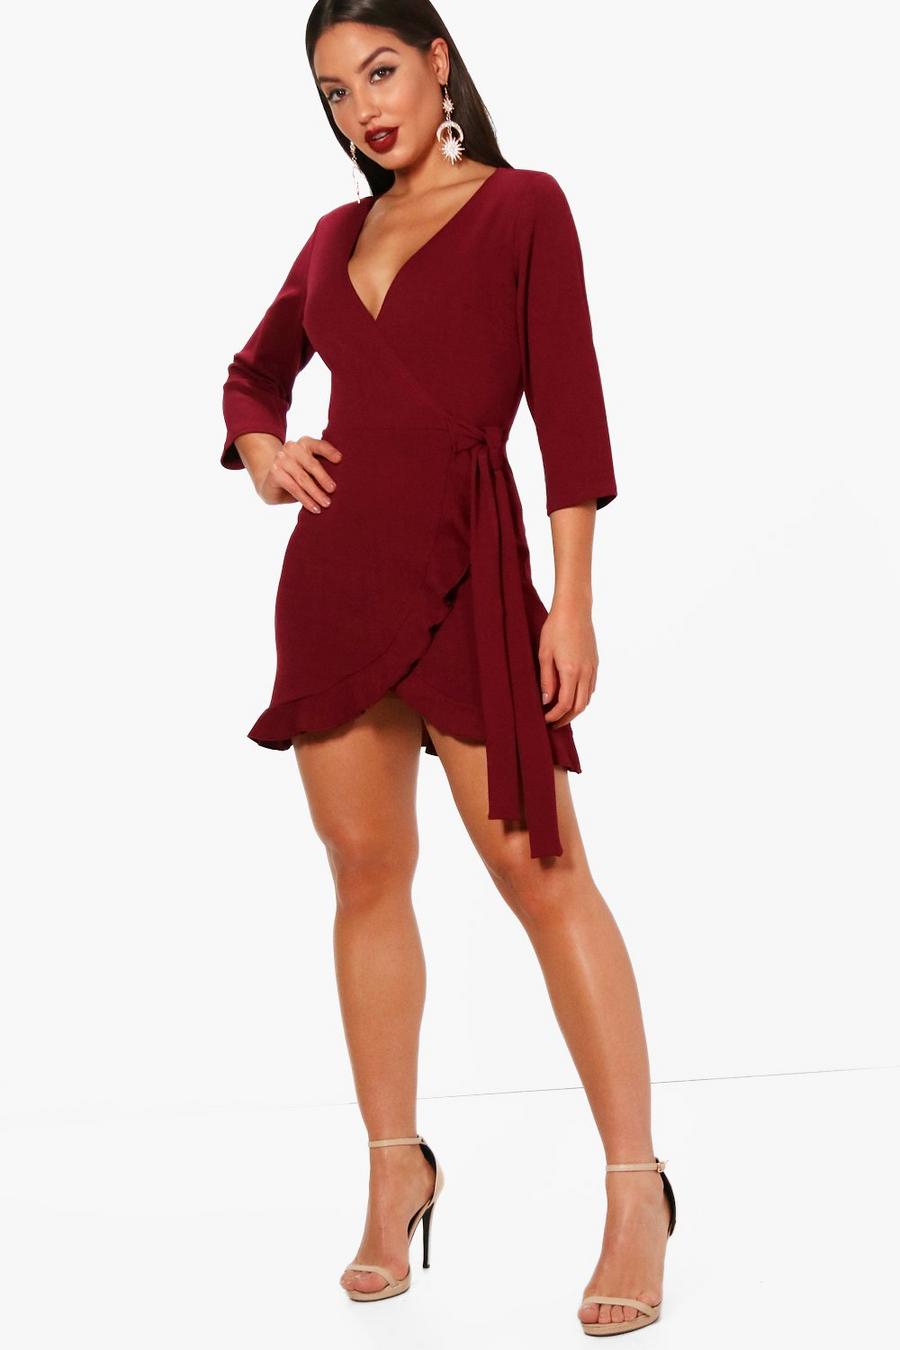 Berry red Formal Tie Wrap Frill Detail Skater Dress